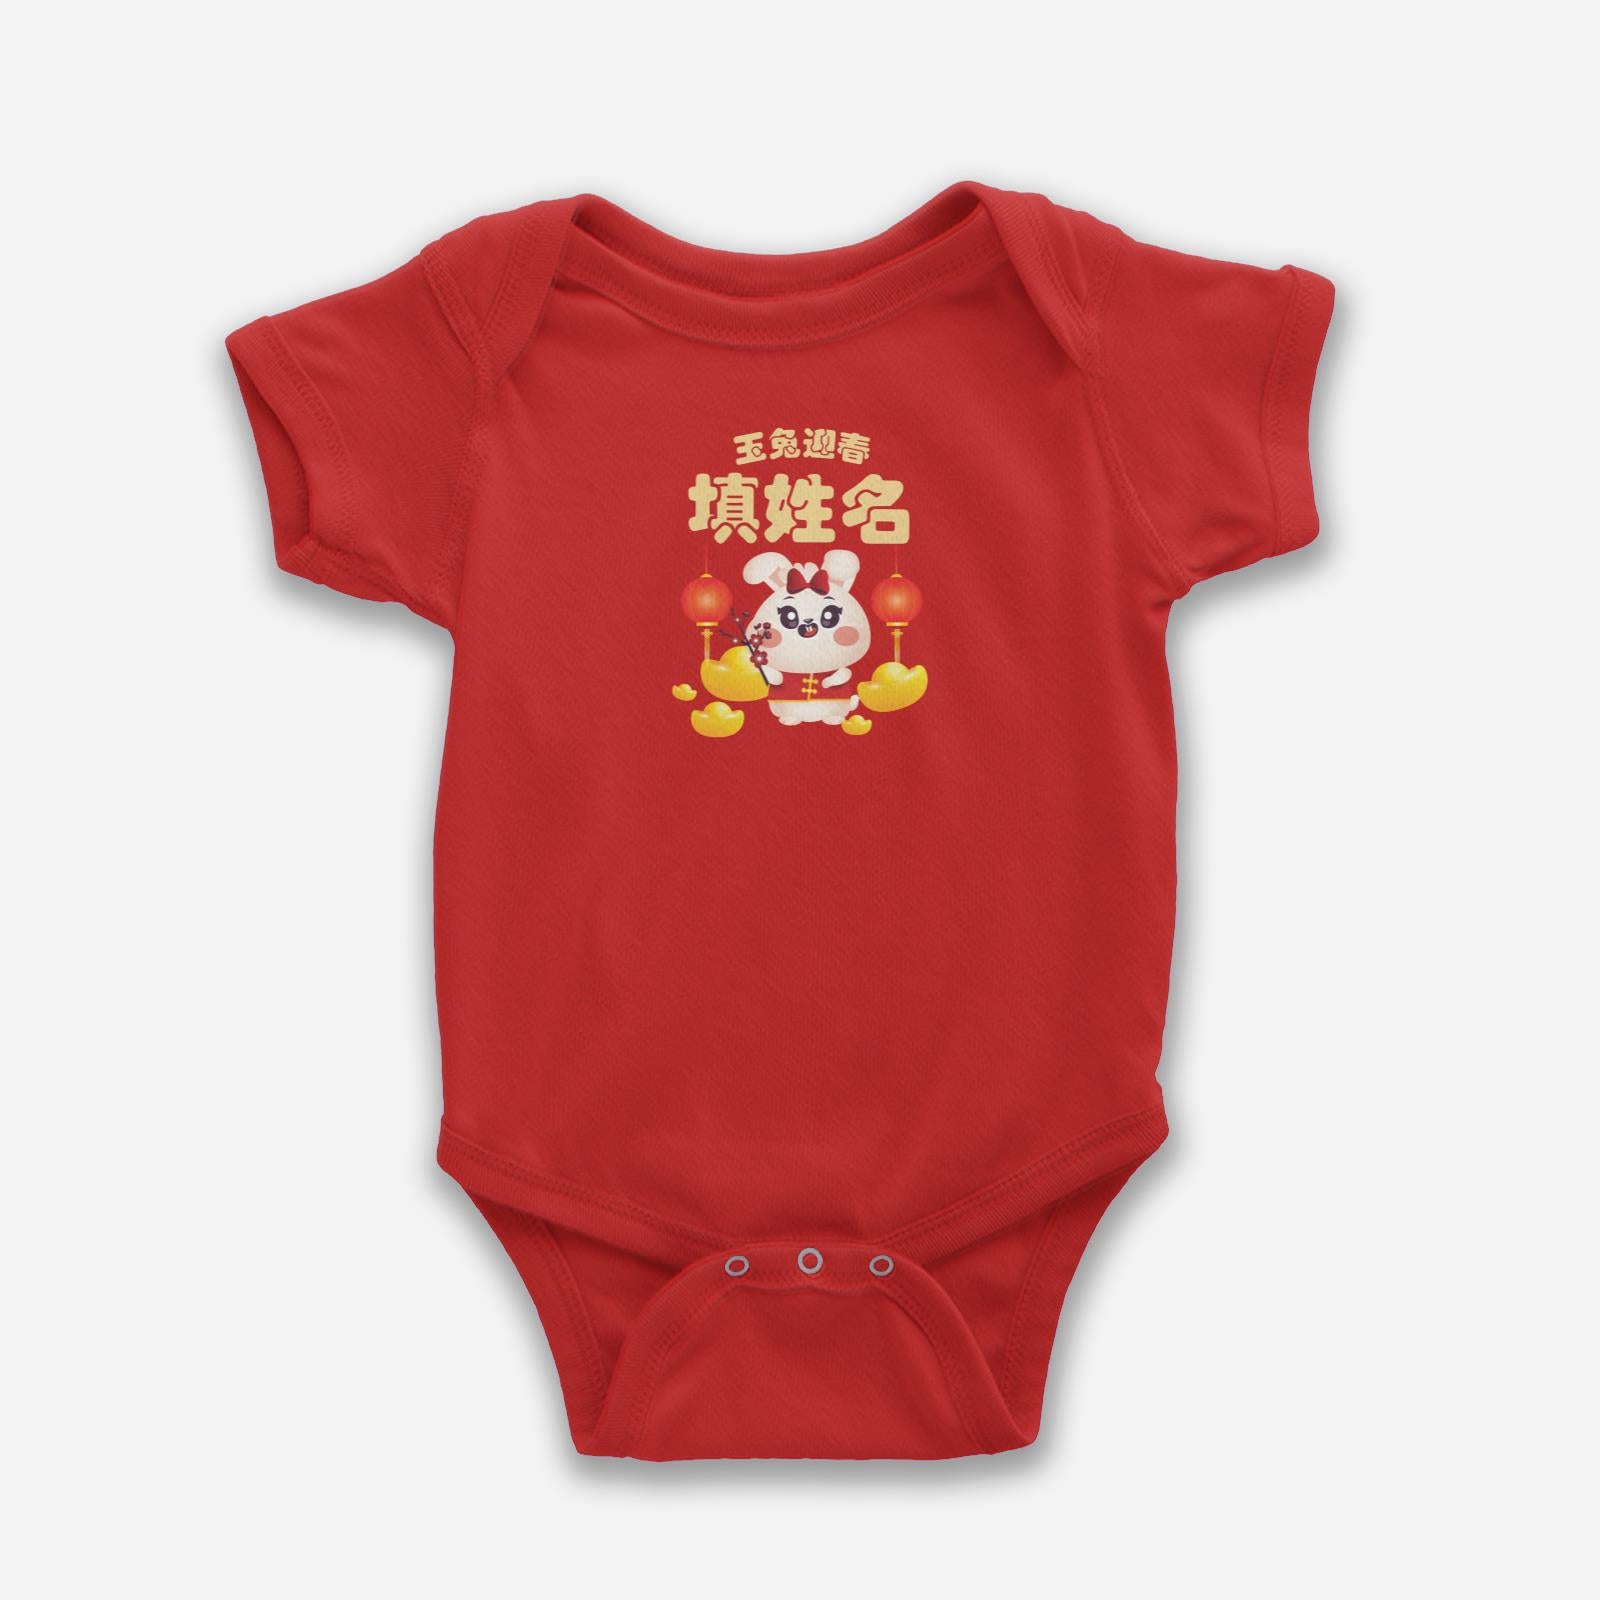 Cny Rabbit Family - Sister Rabbit Baby Romper with Chinese Personalization